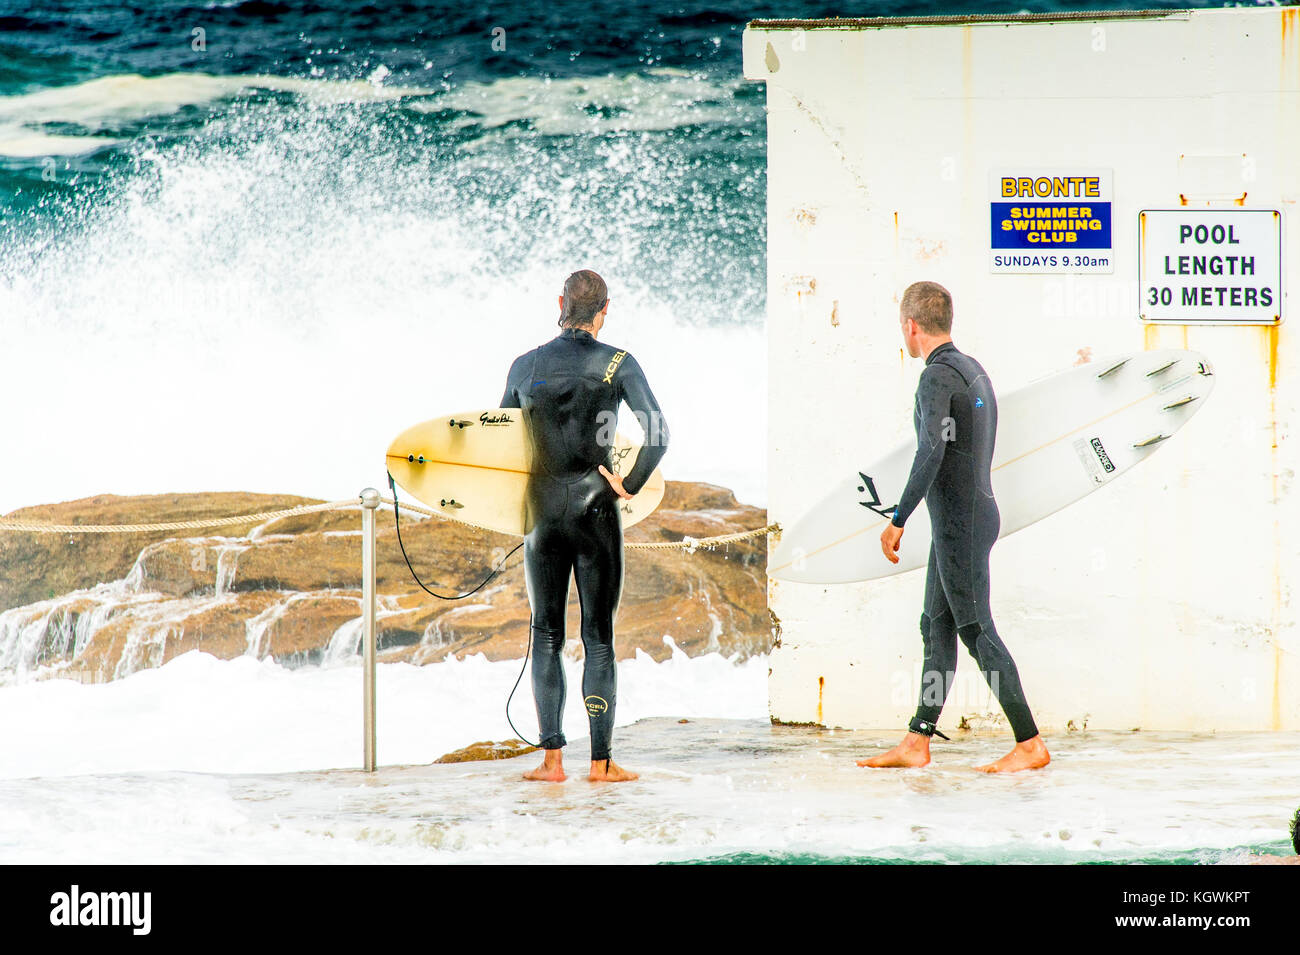 Two surfers wait for the right time to enter the water from the Bronte Beach rock pool in Sydney, NSW, Australia in big surf conditions Stock Photo